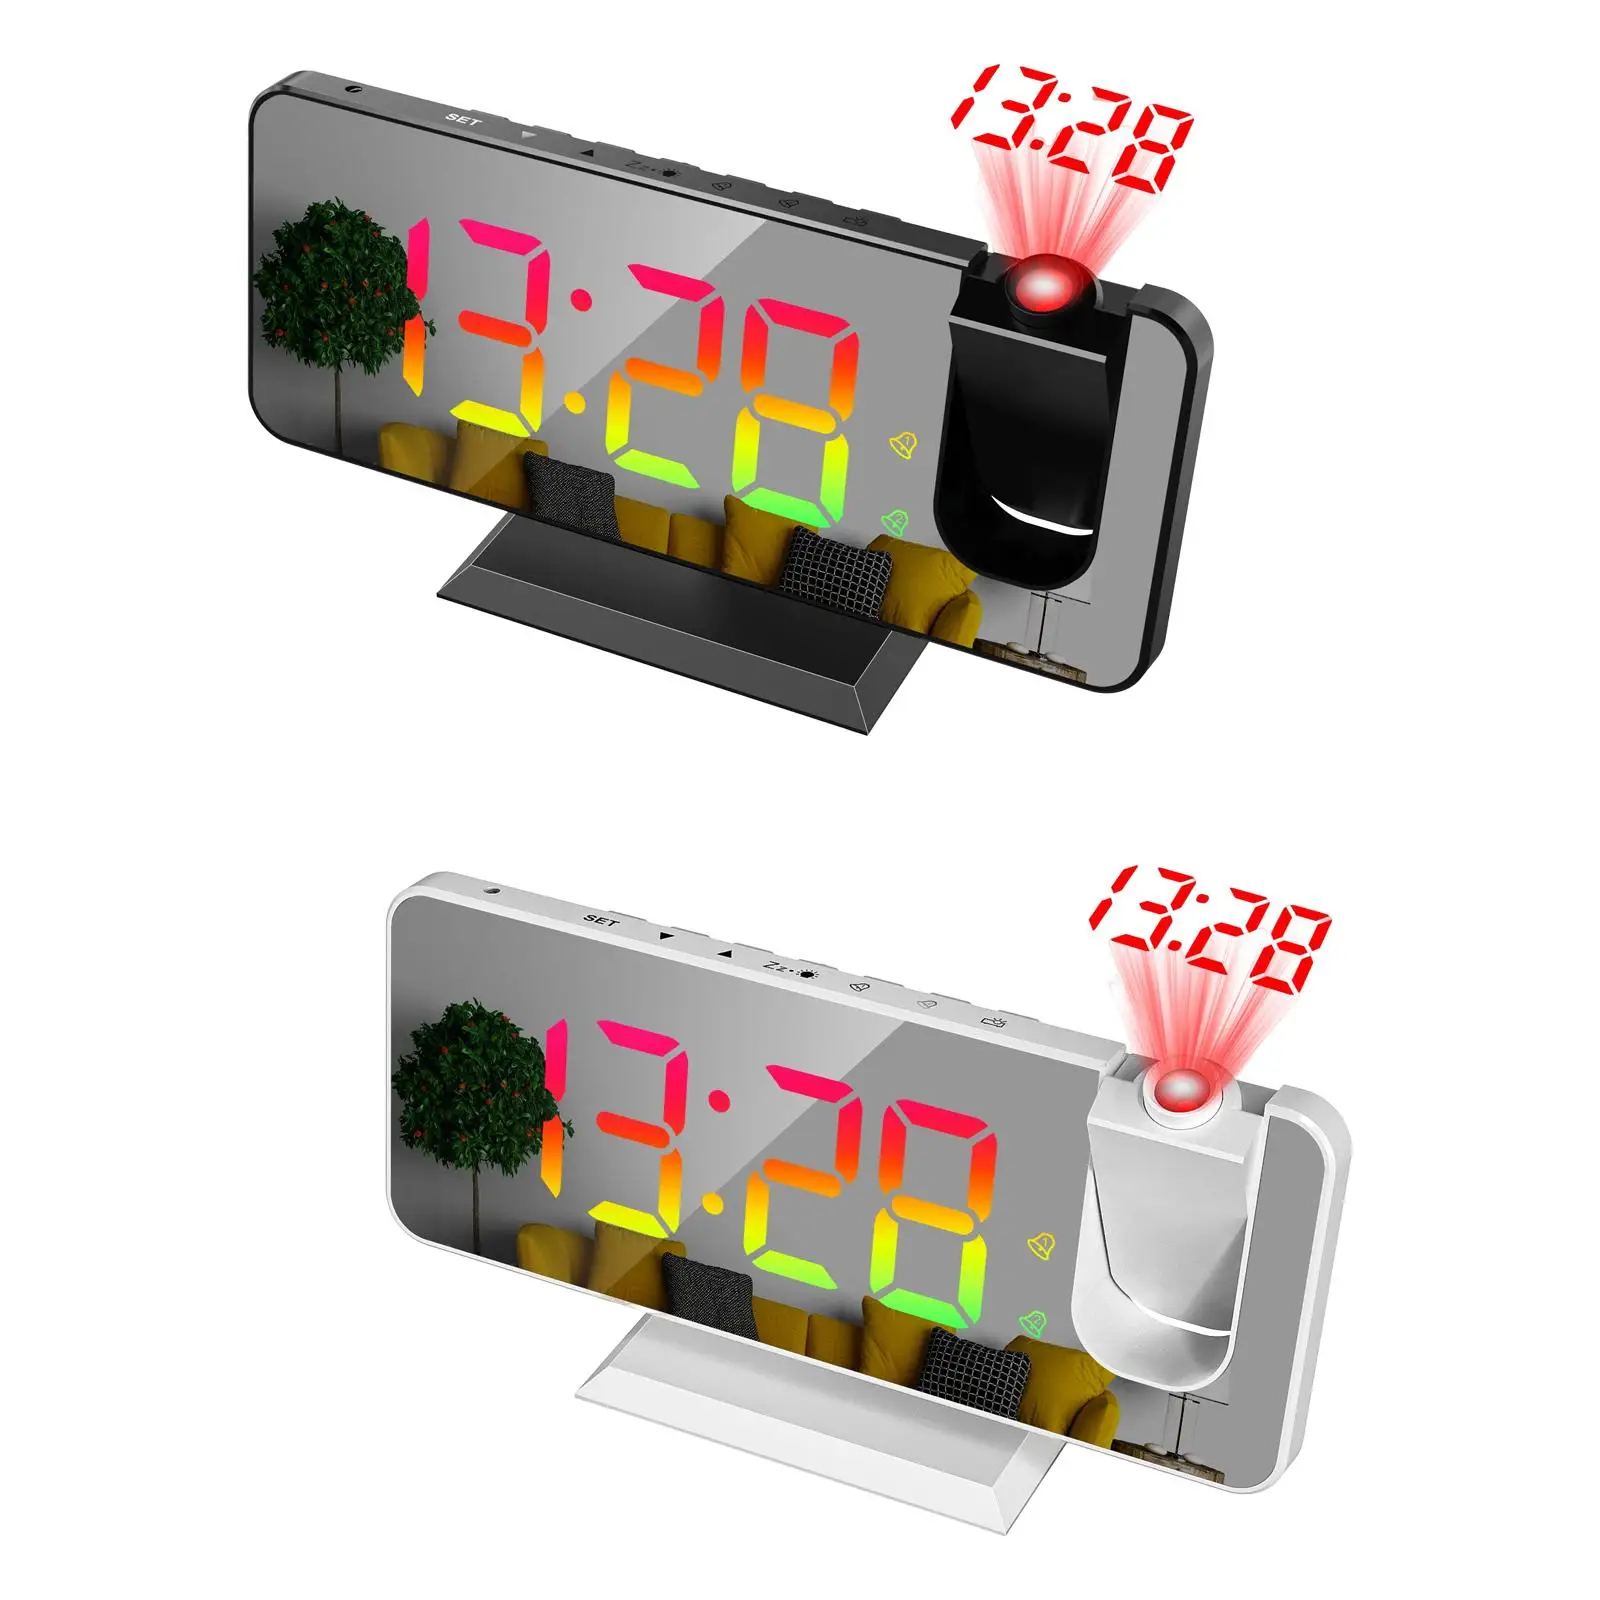 Projection Alarm Clock for Bedroom Color Changing LED Digital USB Powered